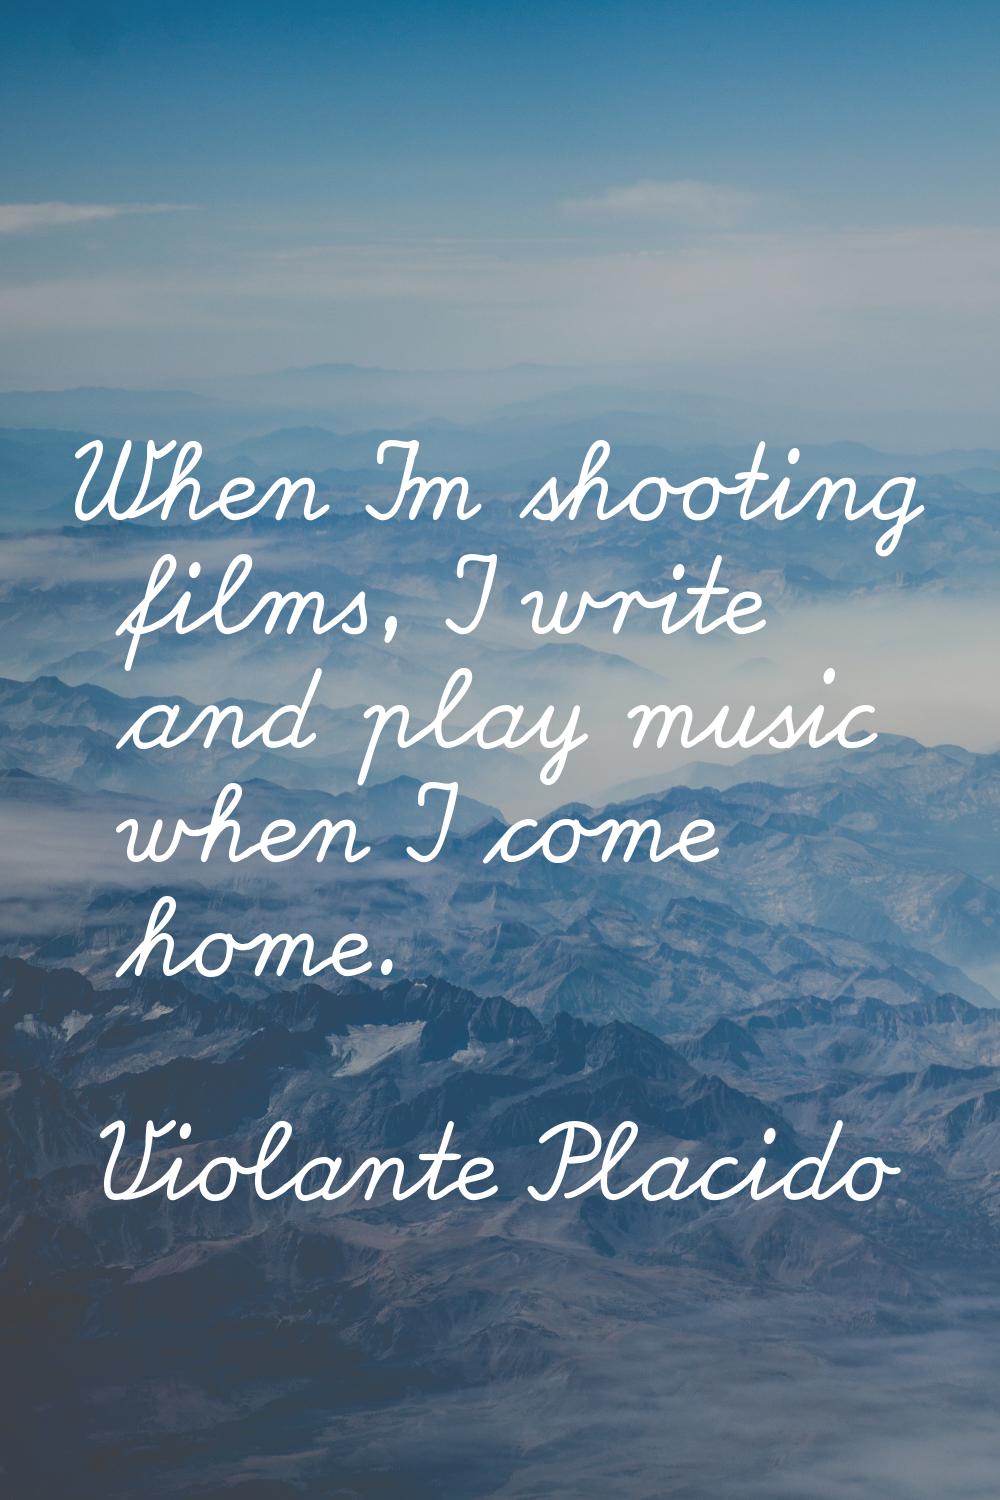 When I'm shooting films, I write and play music when I come home.